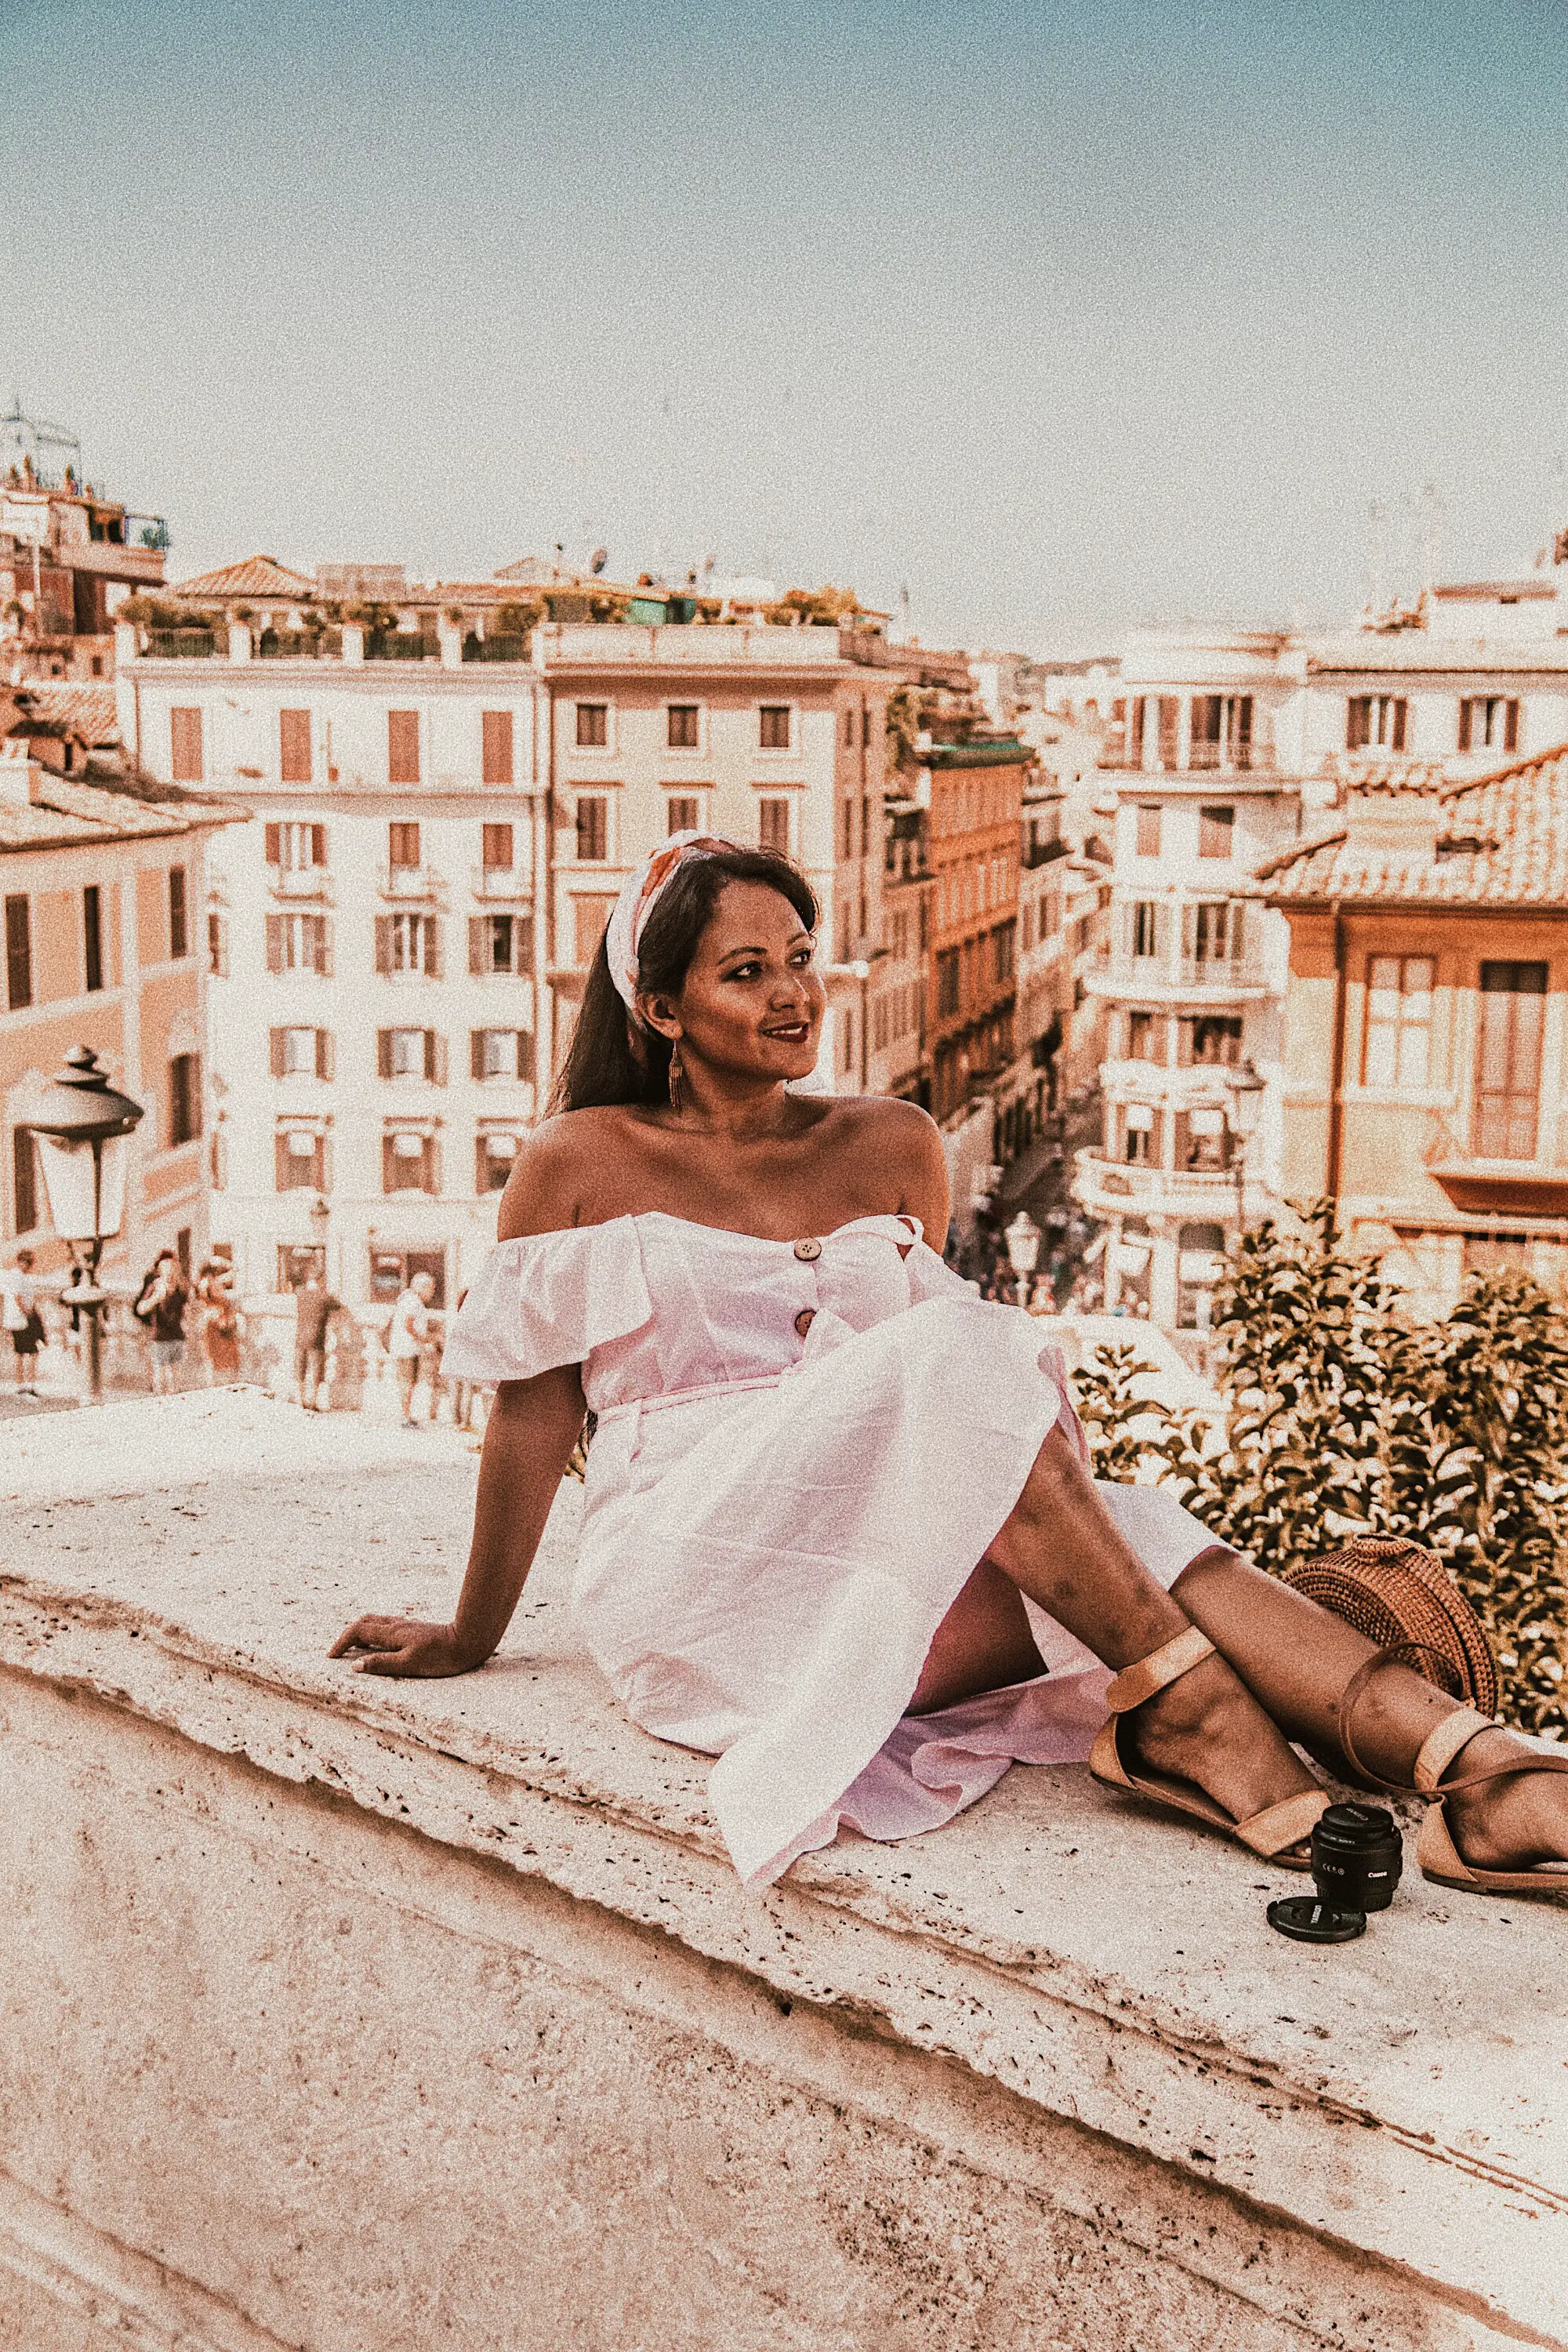 How-To-Wear-Off-Shoulder-Dress-Light-Blush-Pink-Button-Down-Dress-Rattan-Straw-Basket-Bag-Flat-Sandal-Headwrap-Paris-Chic-Style-Fashion-Lookbook-Street-Style-Rome-Italy-5